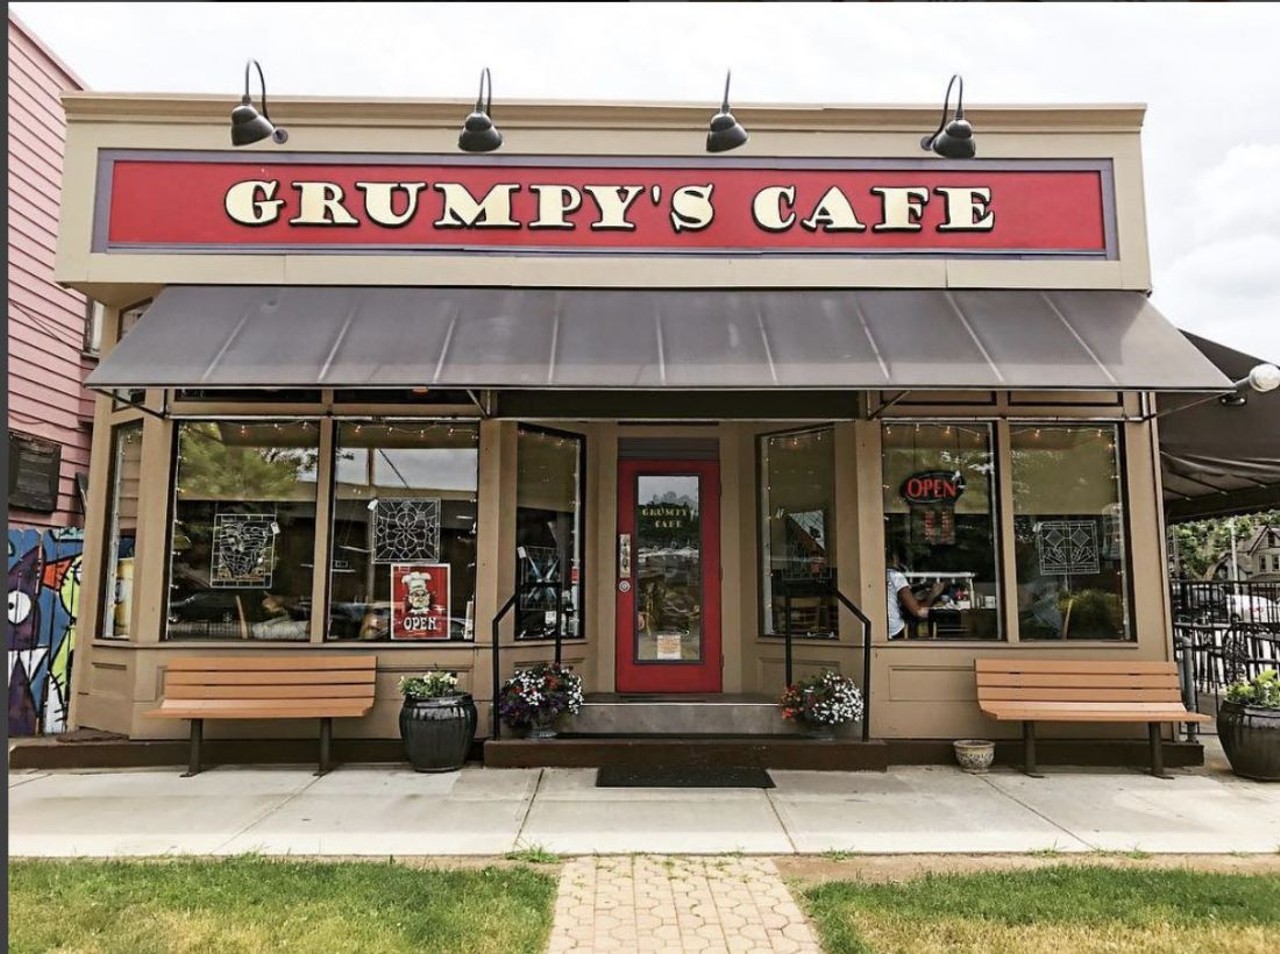  Grumpy&#146;s Cafe
2621 West 14th St., Cleveland 
Grumpy&#146;s Cafe has been a Tremont staple since 1976. Current owner and longtime employee Kathy Owad took over ownership in 2004 and after a fire, turned the new space into a laid-back, comfortable eatery that embraced the local art scene. Grumpy&#146;s is known for having one of the best brunches in town, and the breakfast burrito is a star of the menu.
Photo via Scene Archives